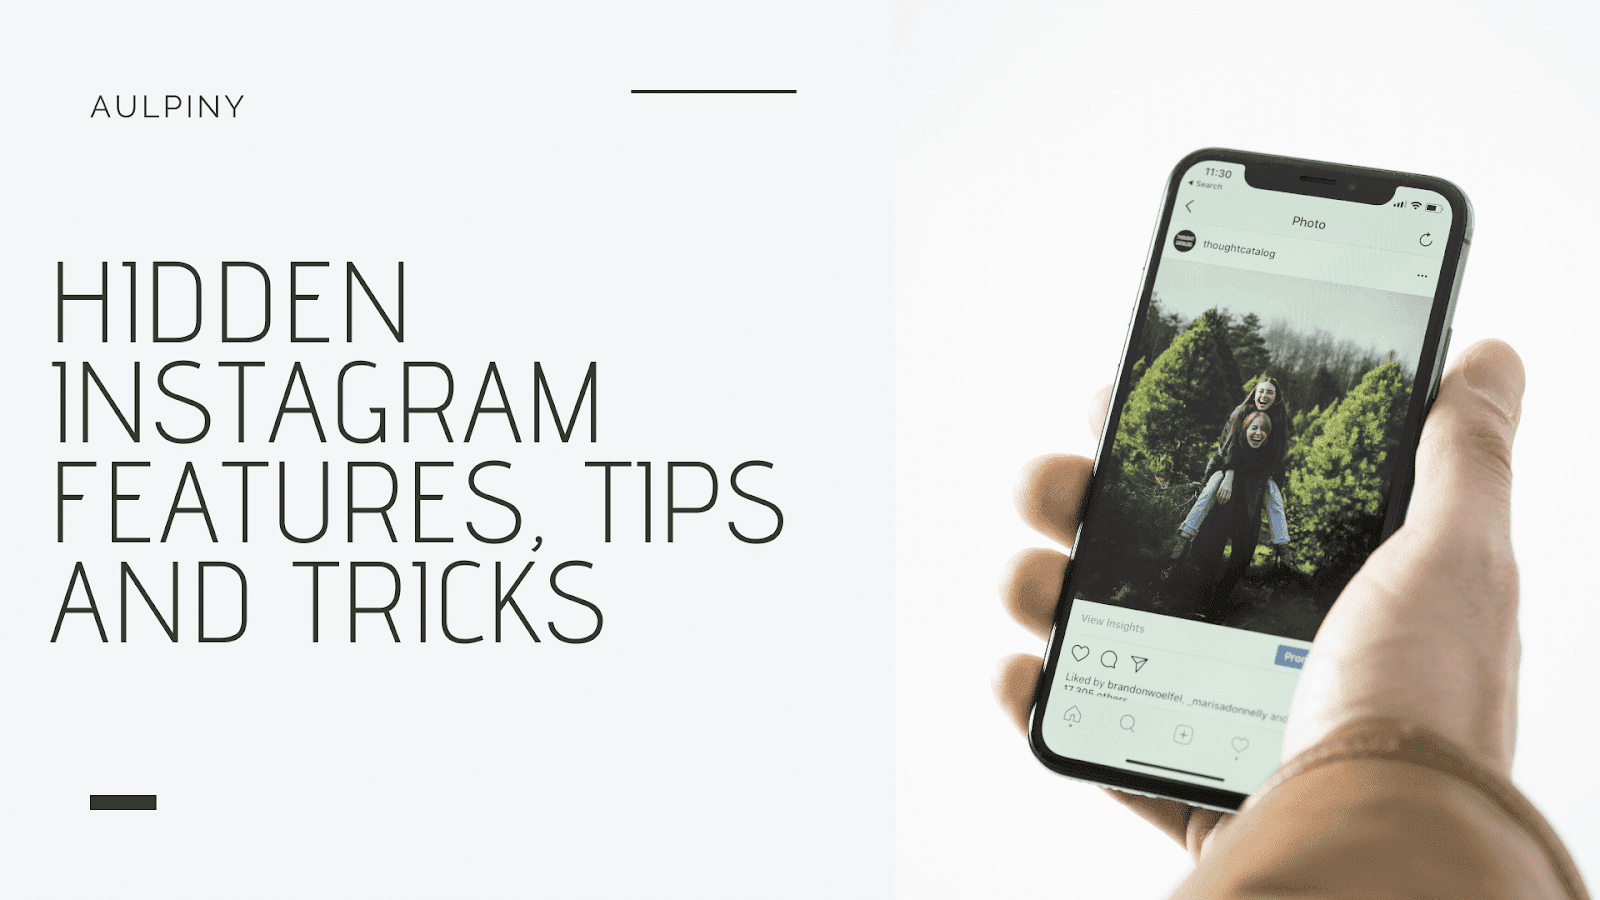 New Instagram Tips And Tricks